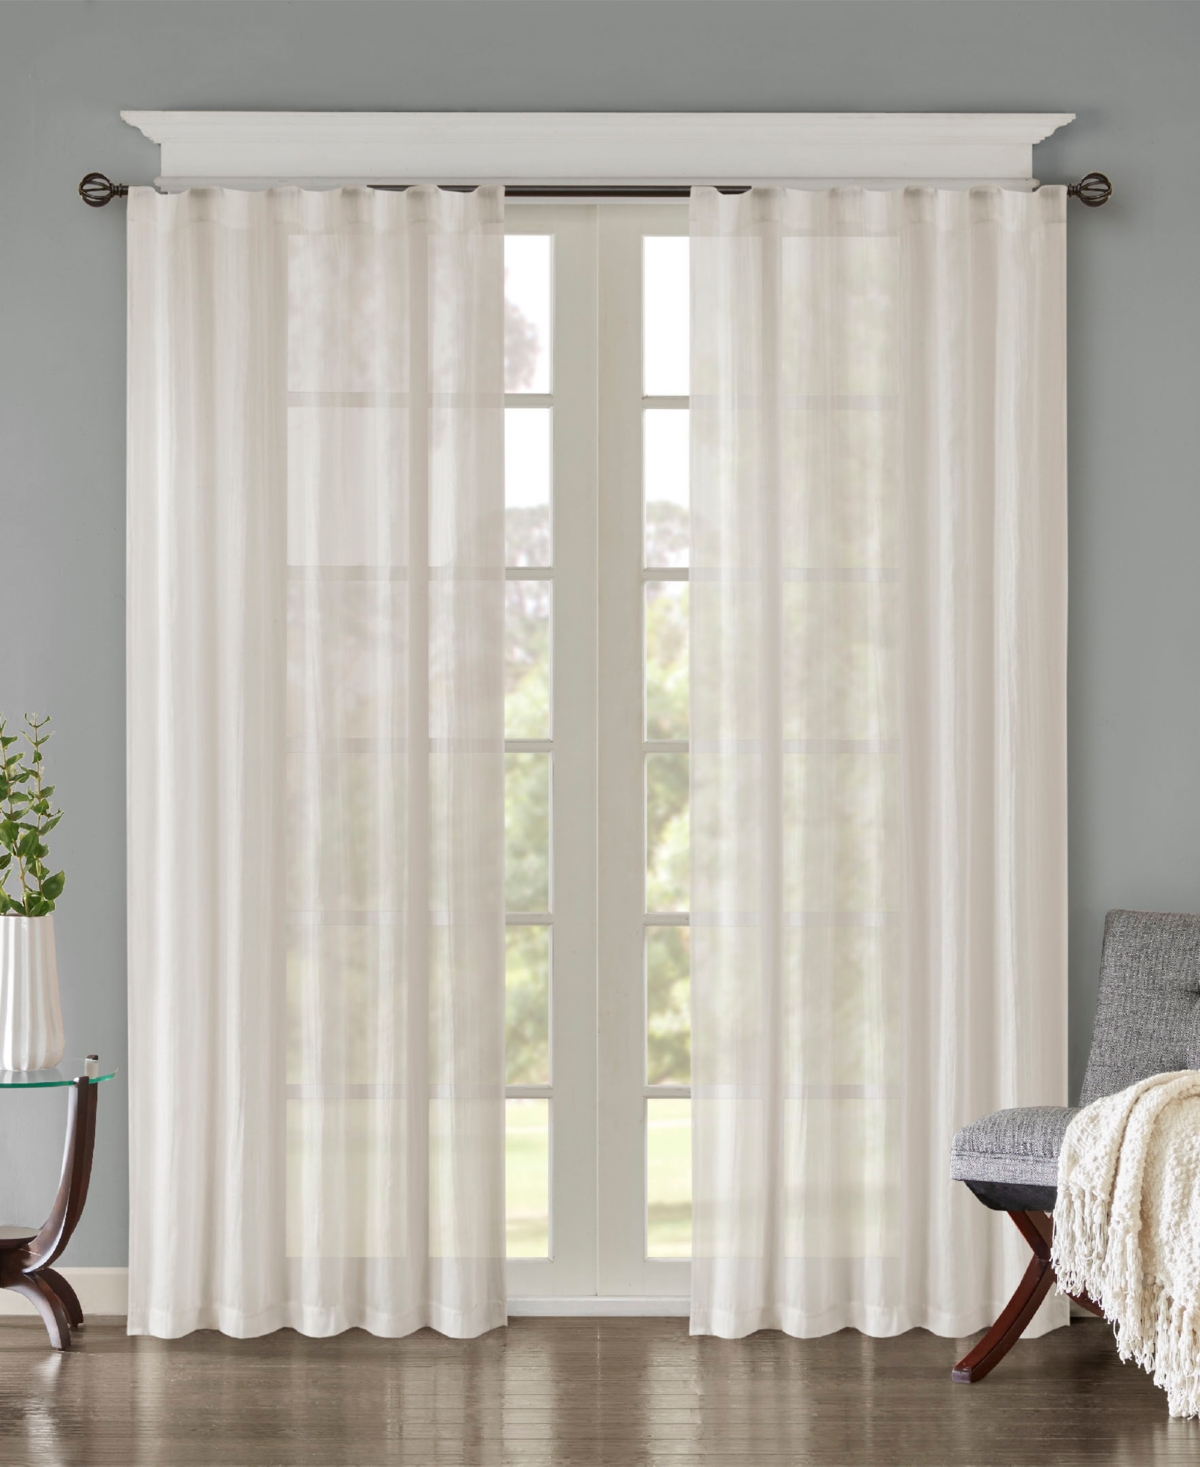 Harper Solid Crushed Curtain Panel Pair, 42"W x 84"L - White